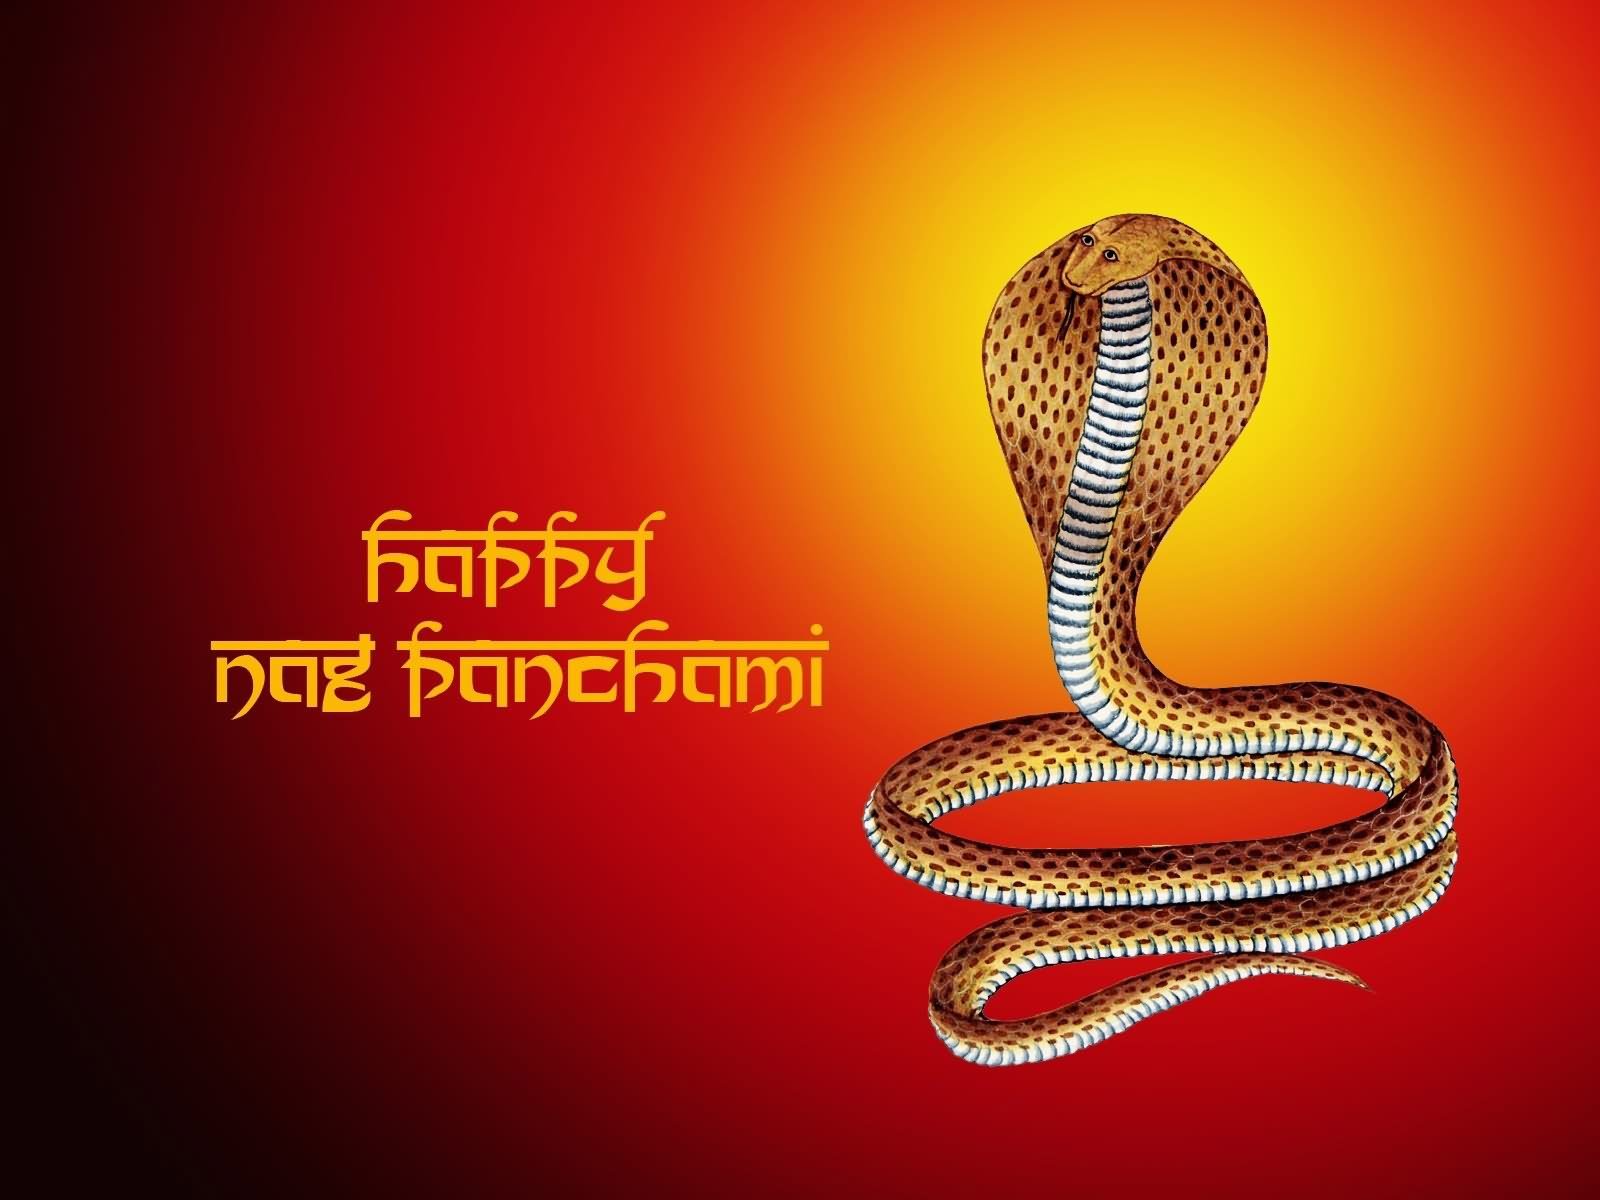 Wish You Happy Nag Panchami Picture For Facebook